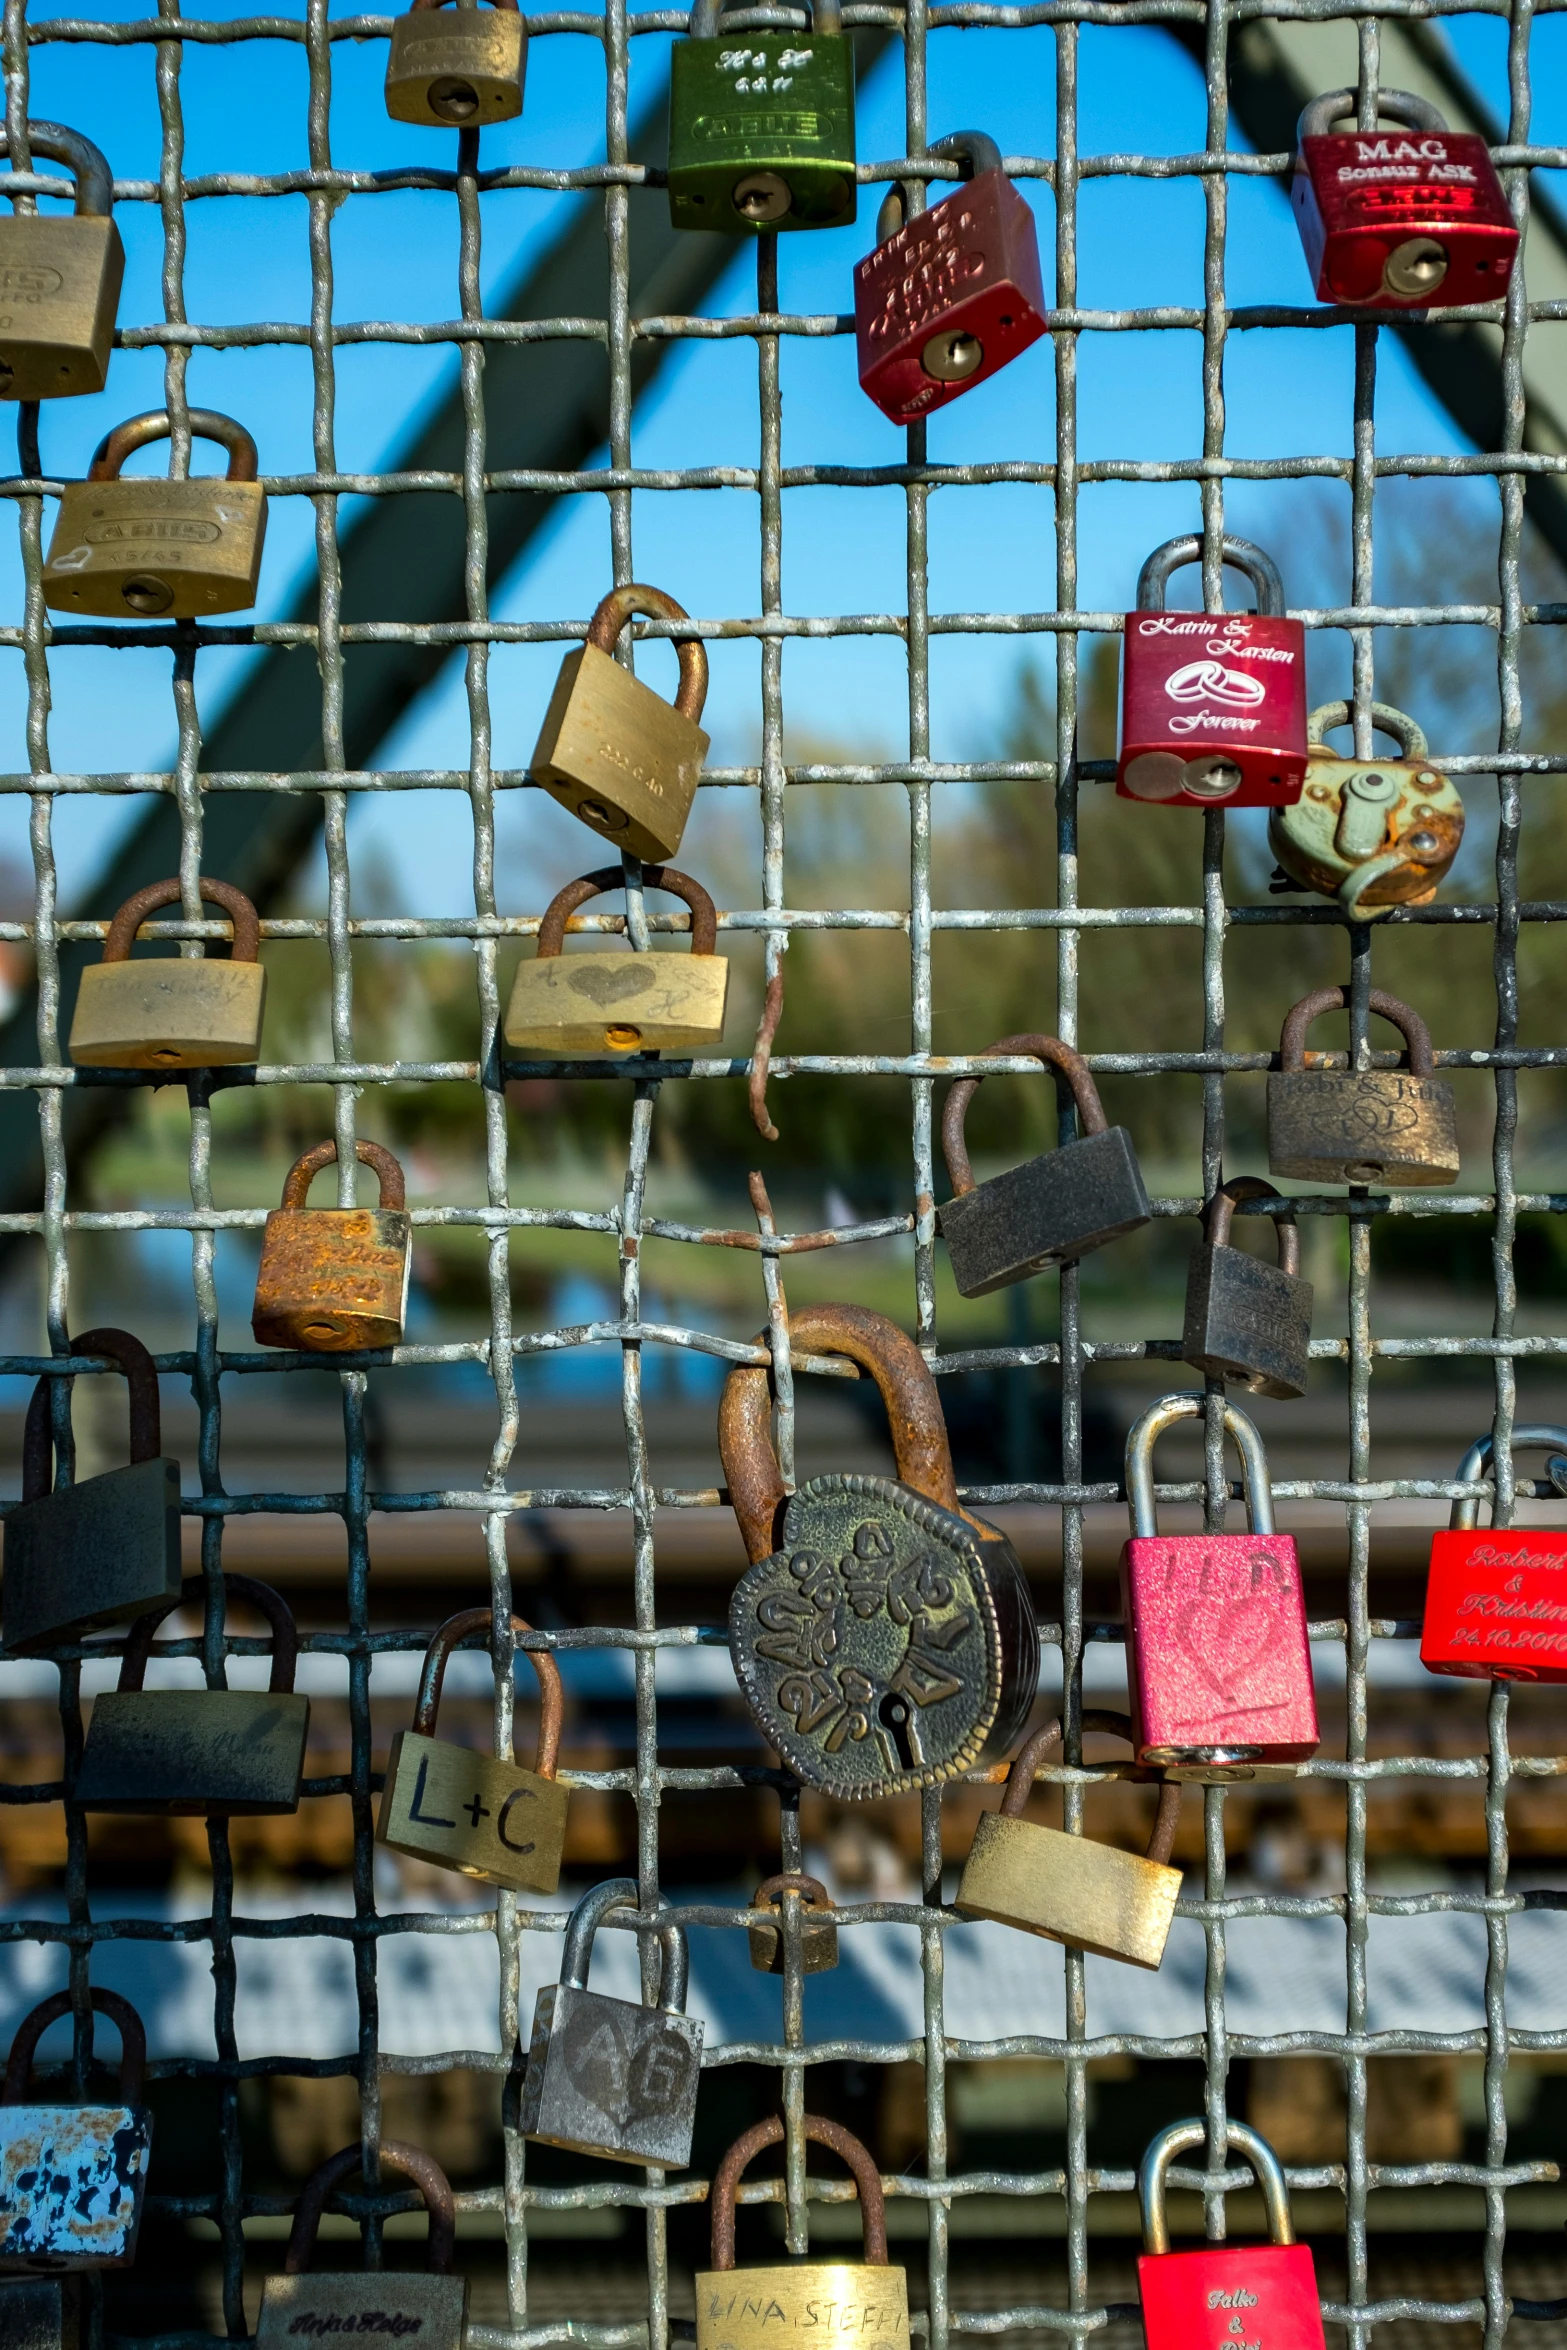 many padlocks are attached to the fence